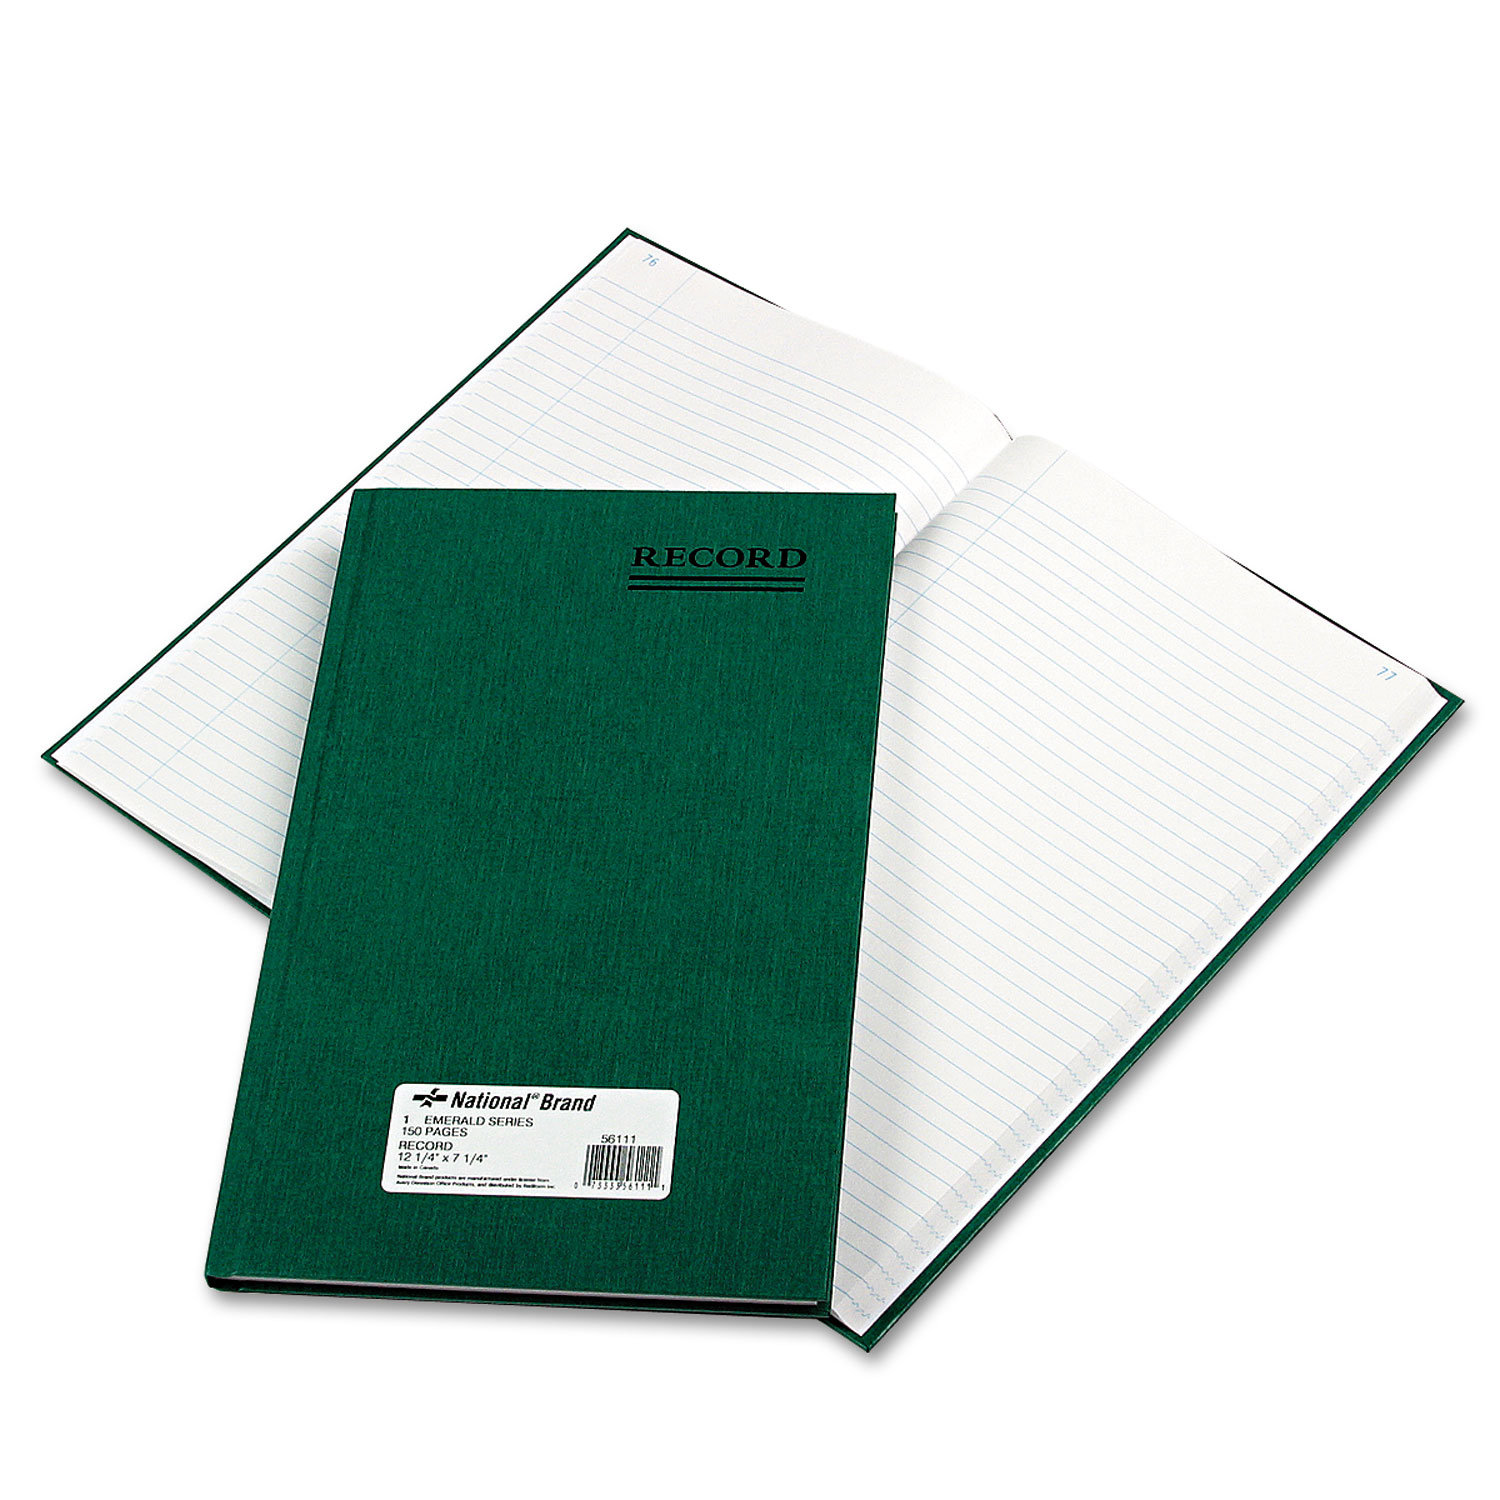  National 56111 Emerald Series Account Book, Green Cover, 150 Pages, 12 1/4 x 7 1/4 (RED56111) 